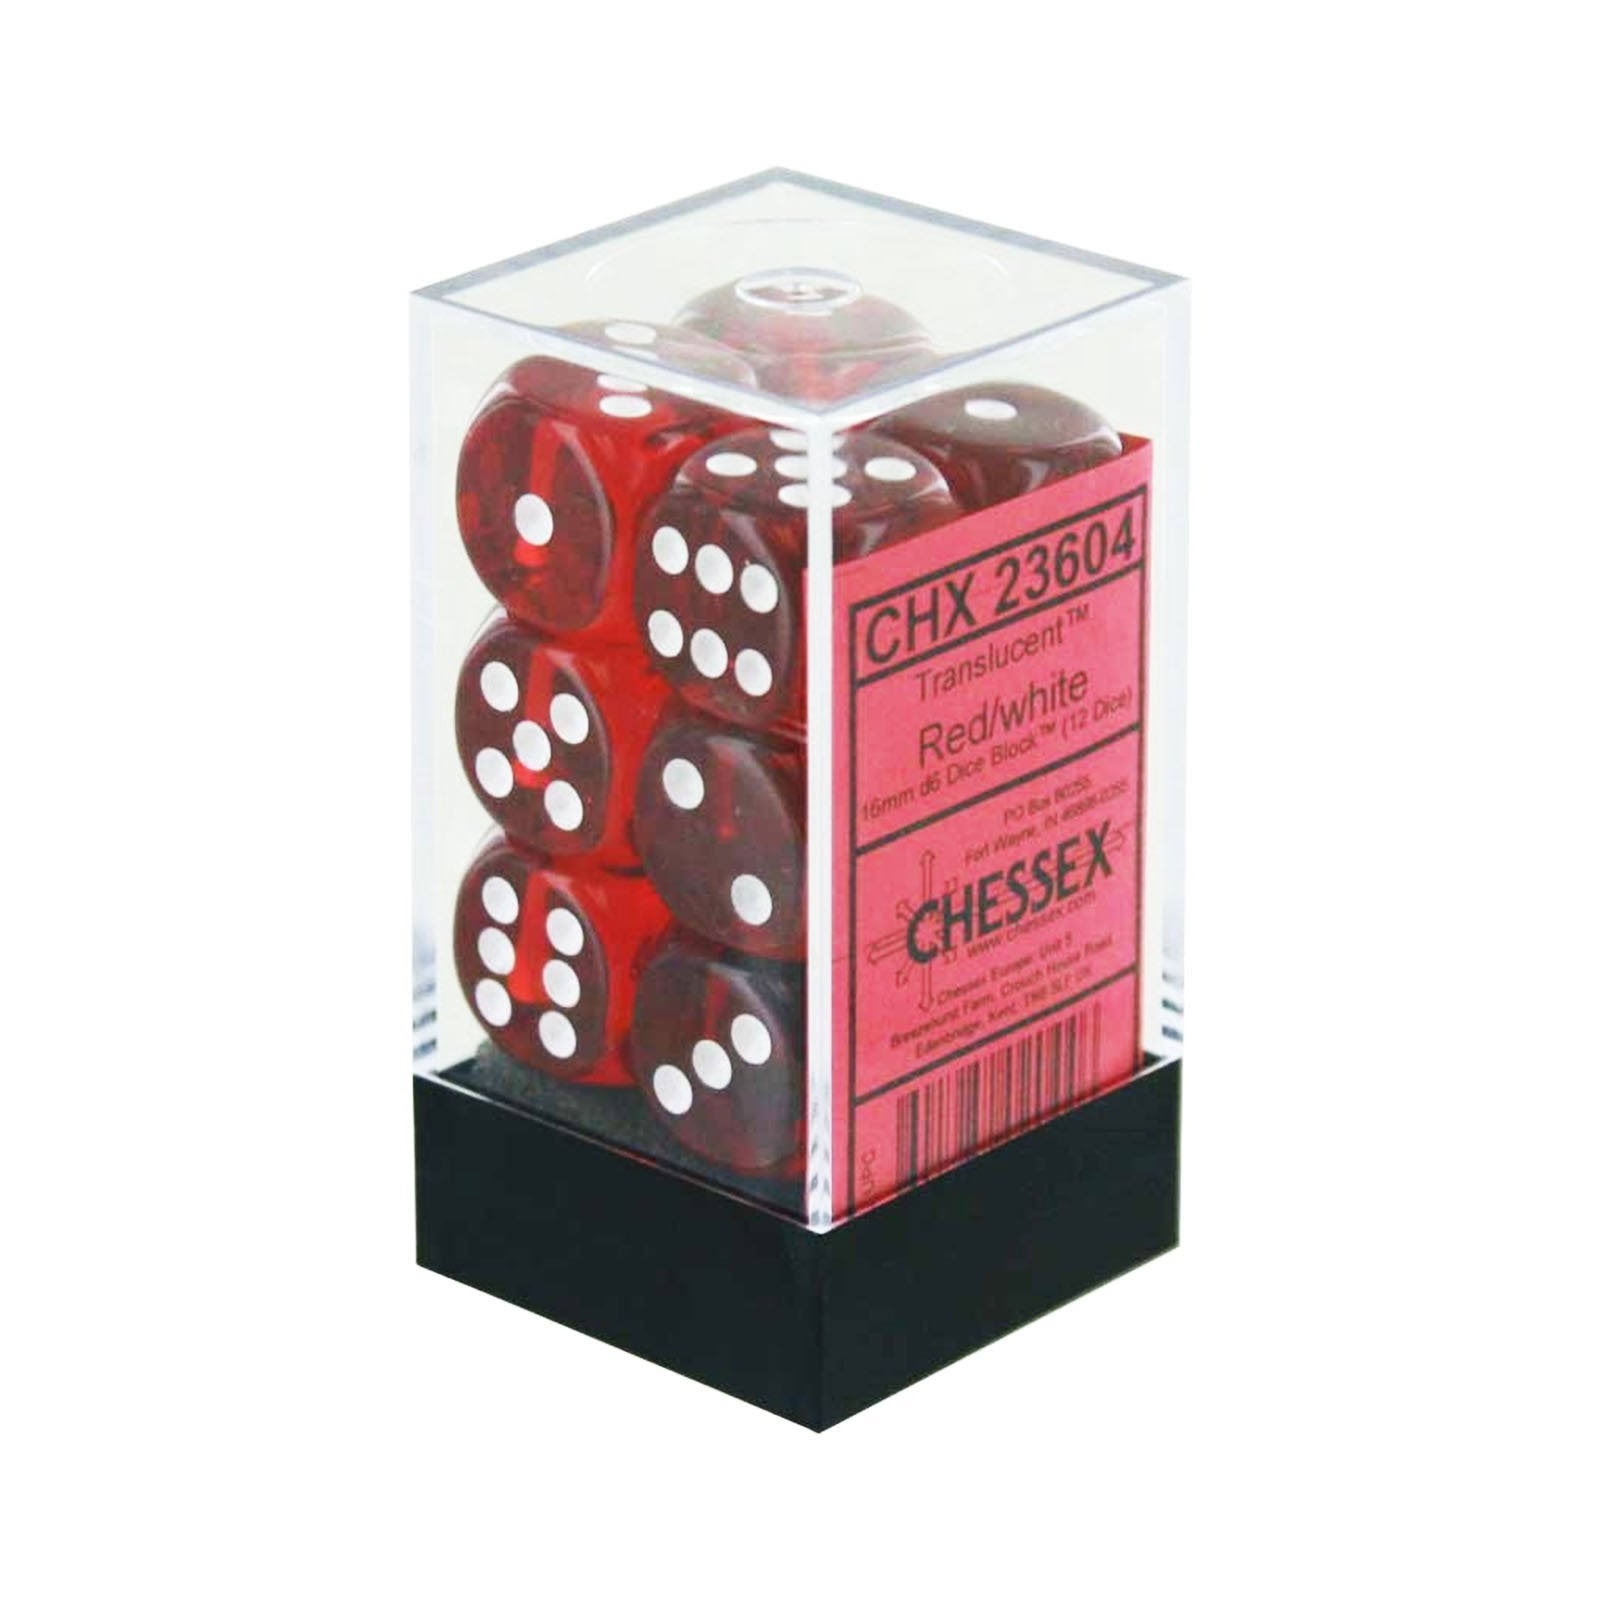 Chessex Translucent Dice Set - D6, 16mm, Red with White, 12pcs